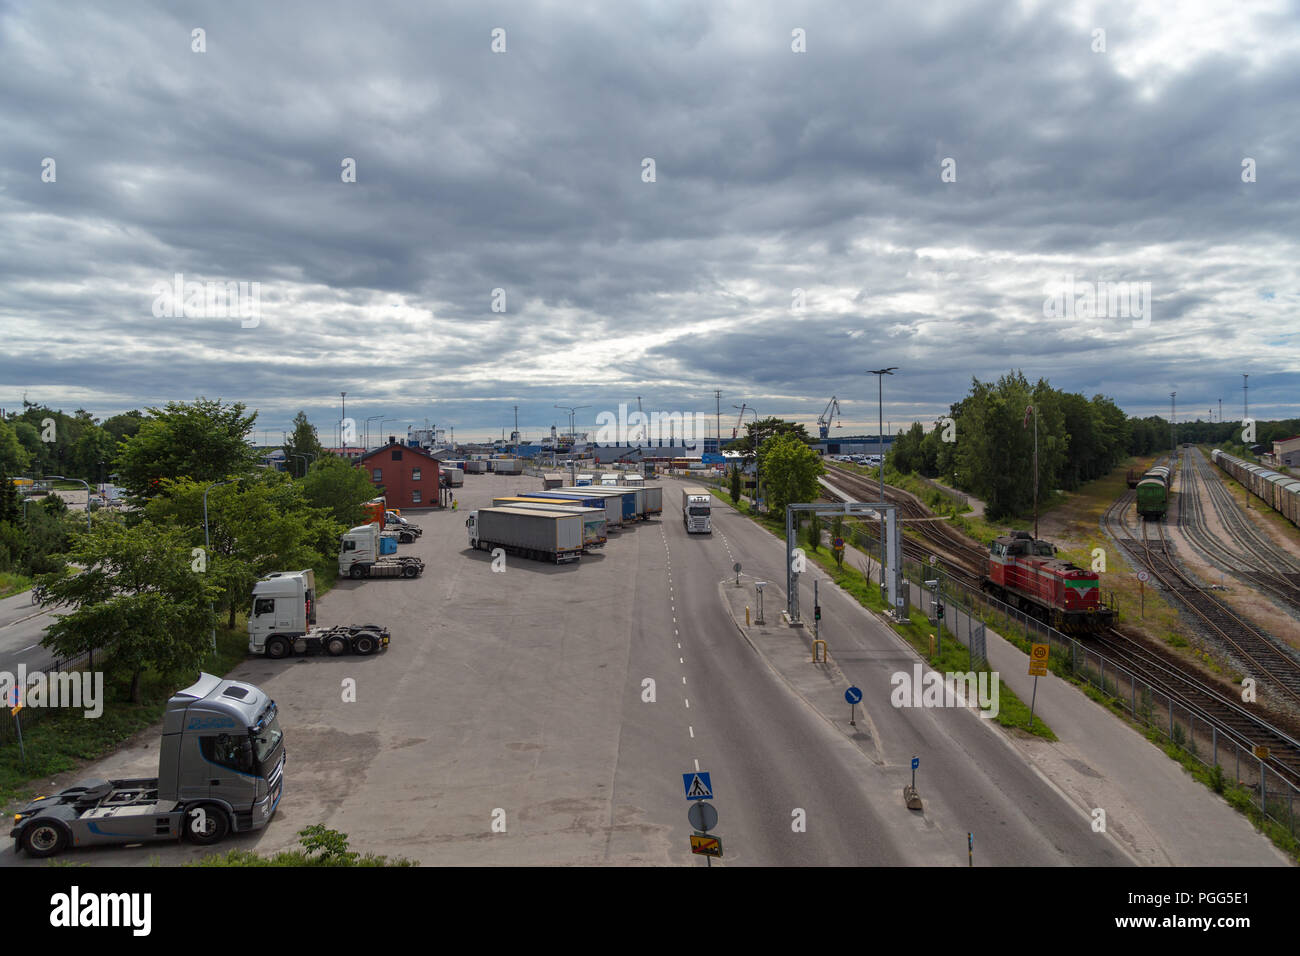 Editorial 07.06.2018 Hanko Finland, entrence of Port of Hanko with trailers and trains Stock Photo